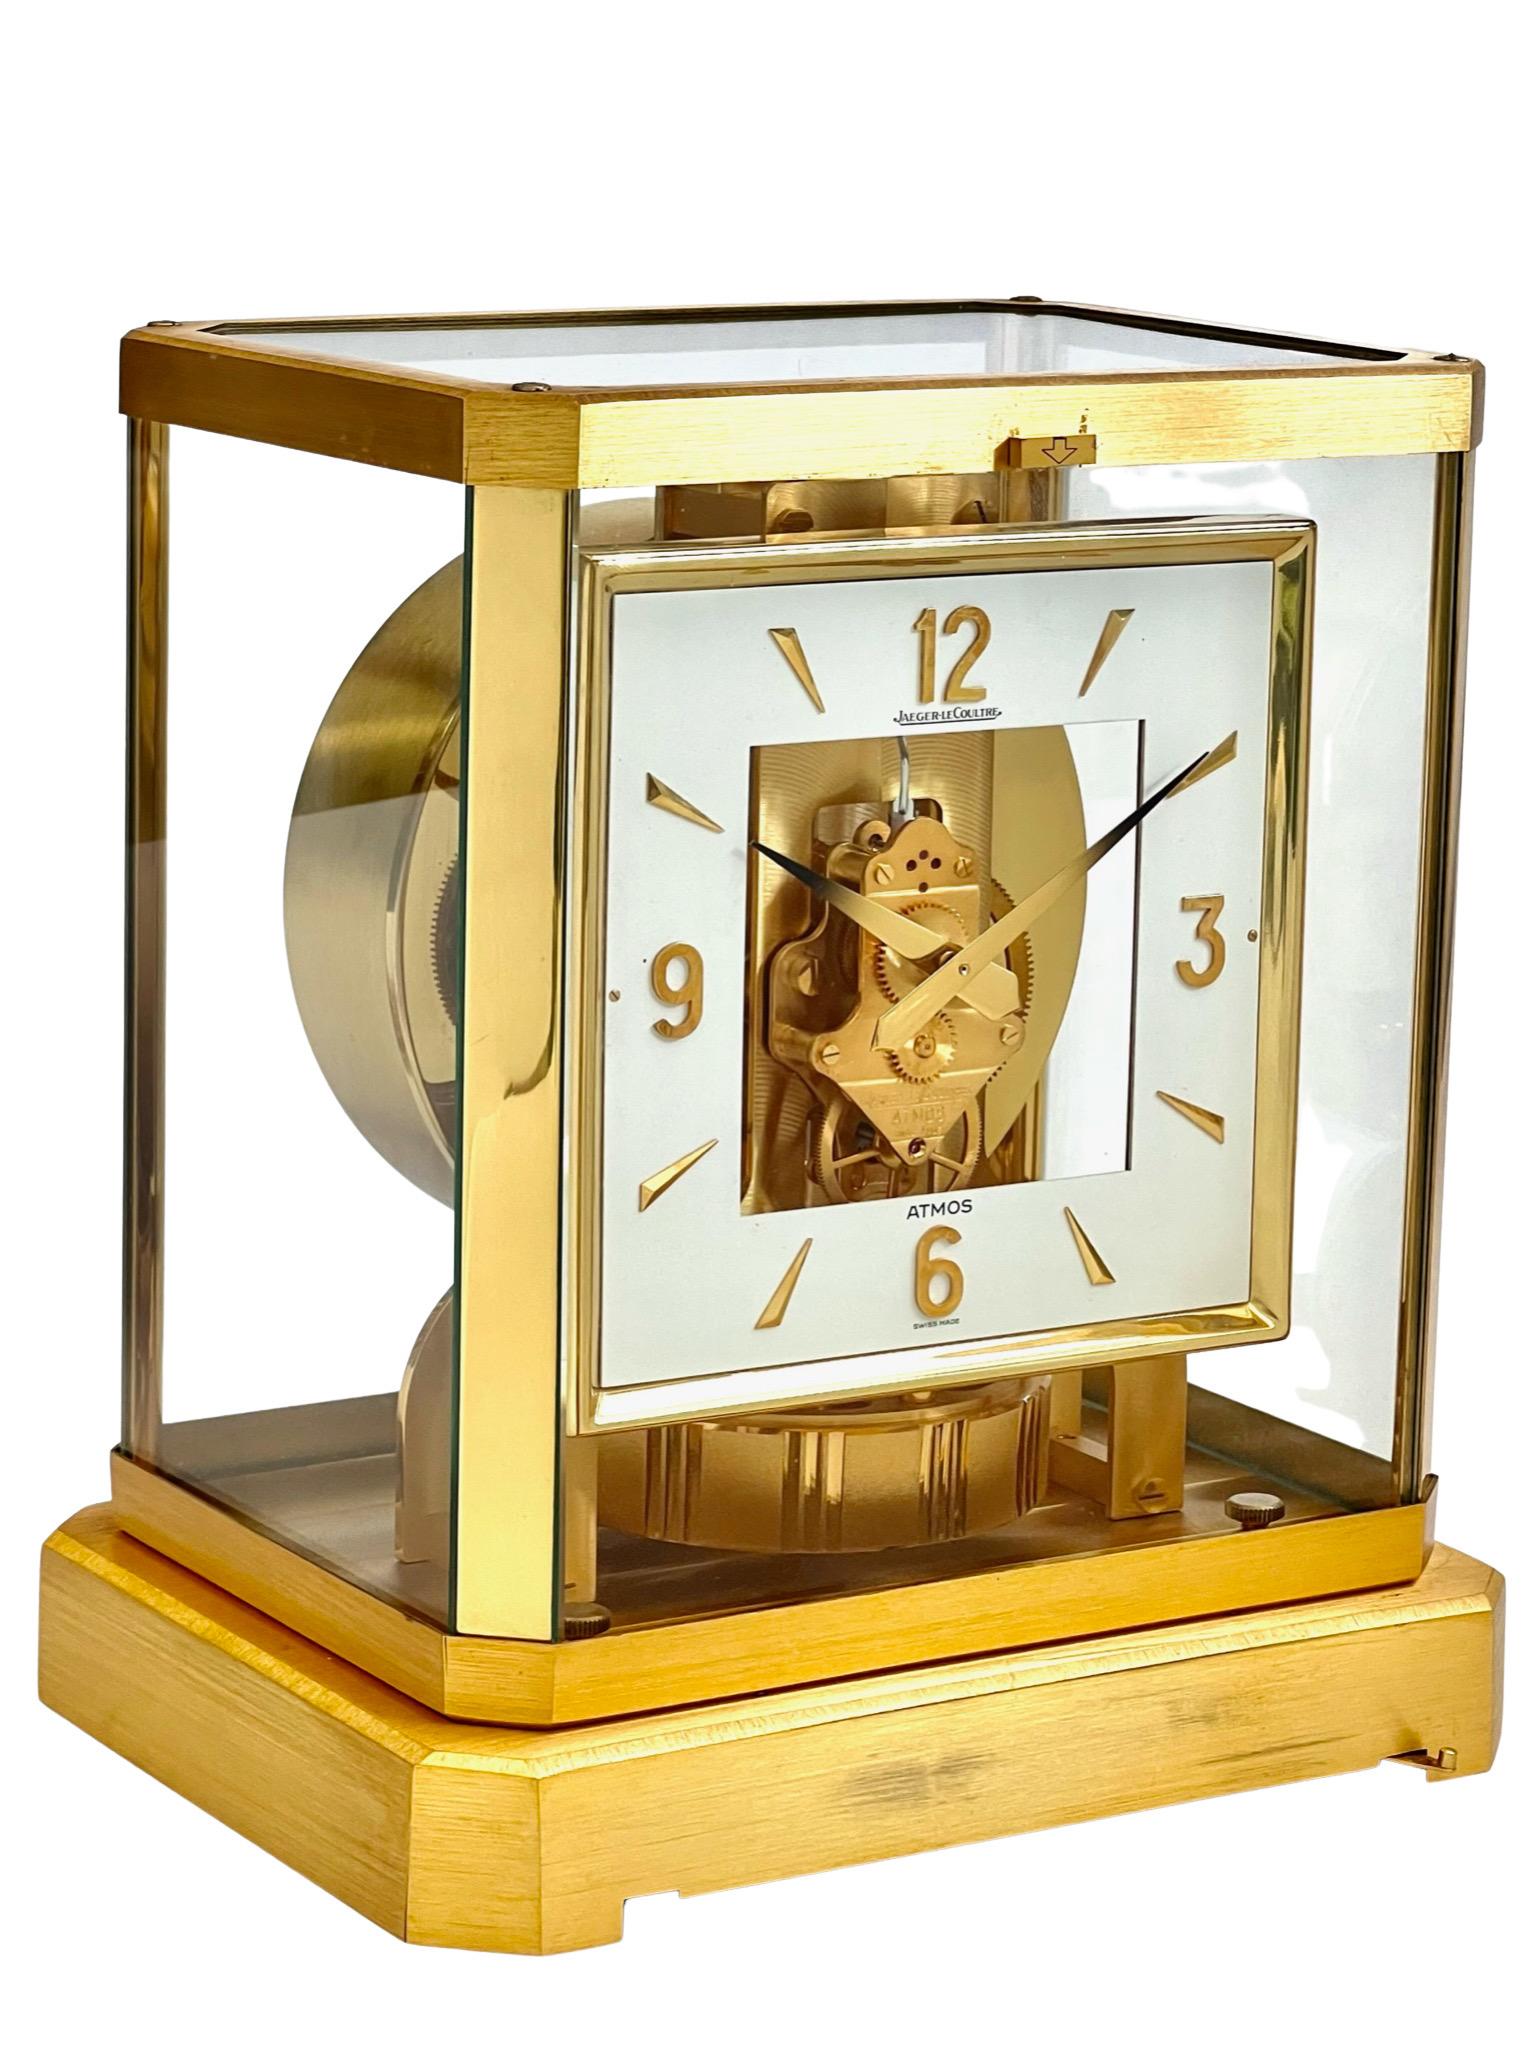 A stunning Mid Century Jaeger LeCoultre Atmos clock with the rare square dial. Serial Number 484155, Caliber 528-8.

In its glass case, the Atmos clock’s unique design allows the owner to see the complexity of the machinery from all angles. As